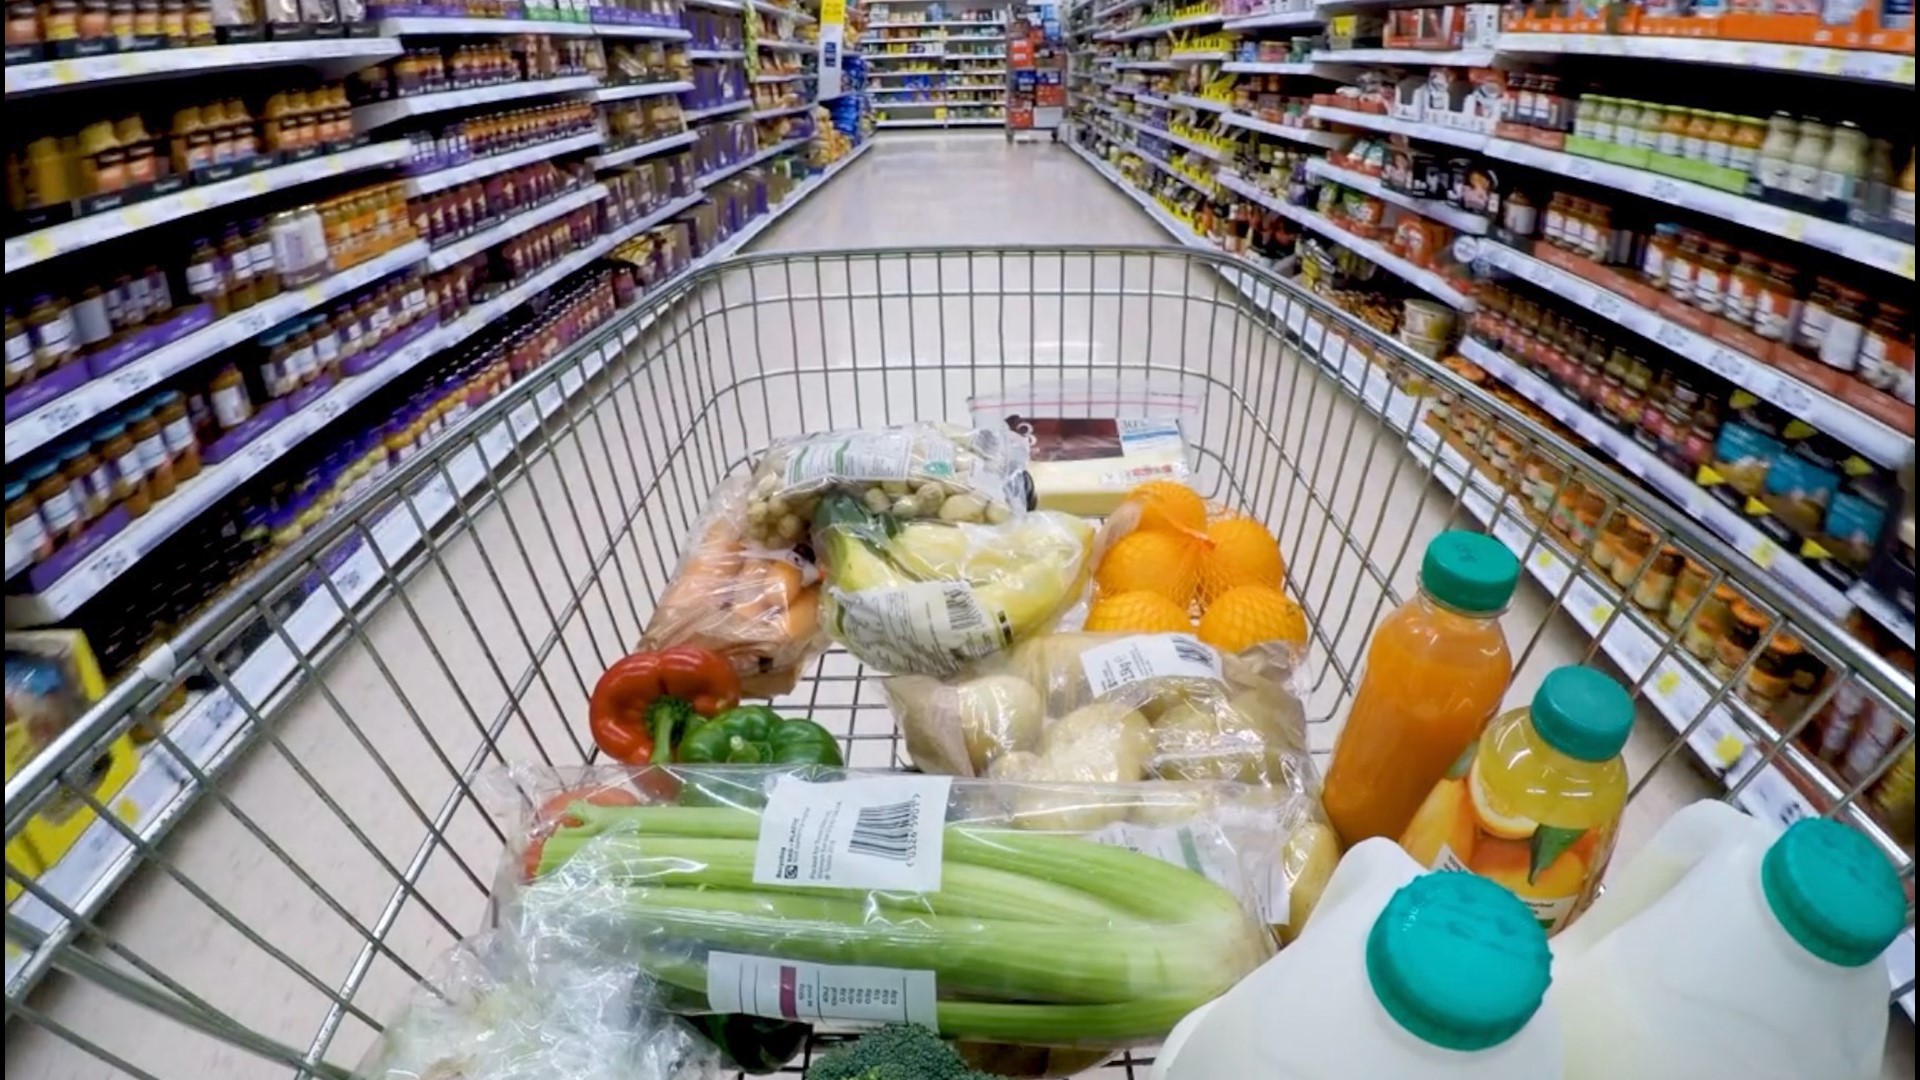 We've put a pause on the days of fashion trends, but say hello to a new trend, the grocery trend! Here are some grocery trends to look forward to in 2021. Buzz60's Chloe Hurst has the story!